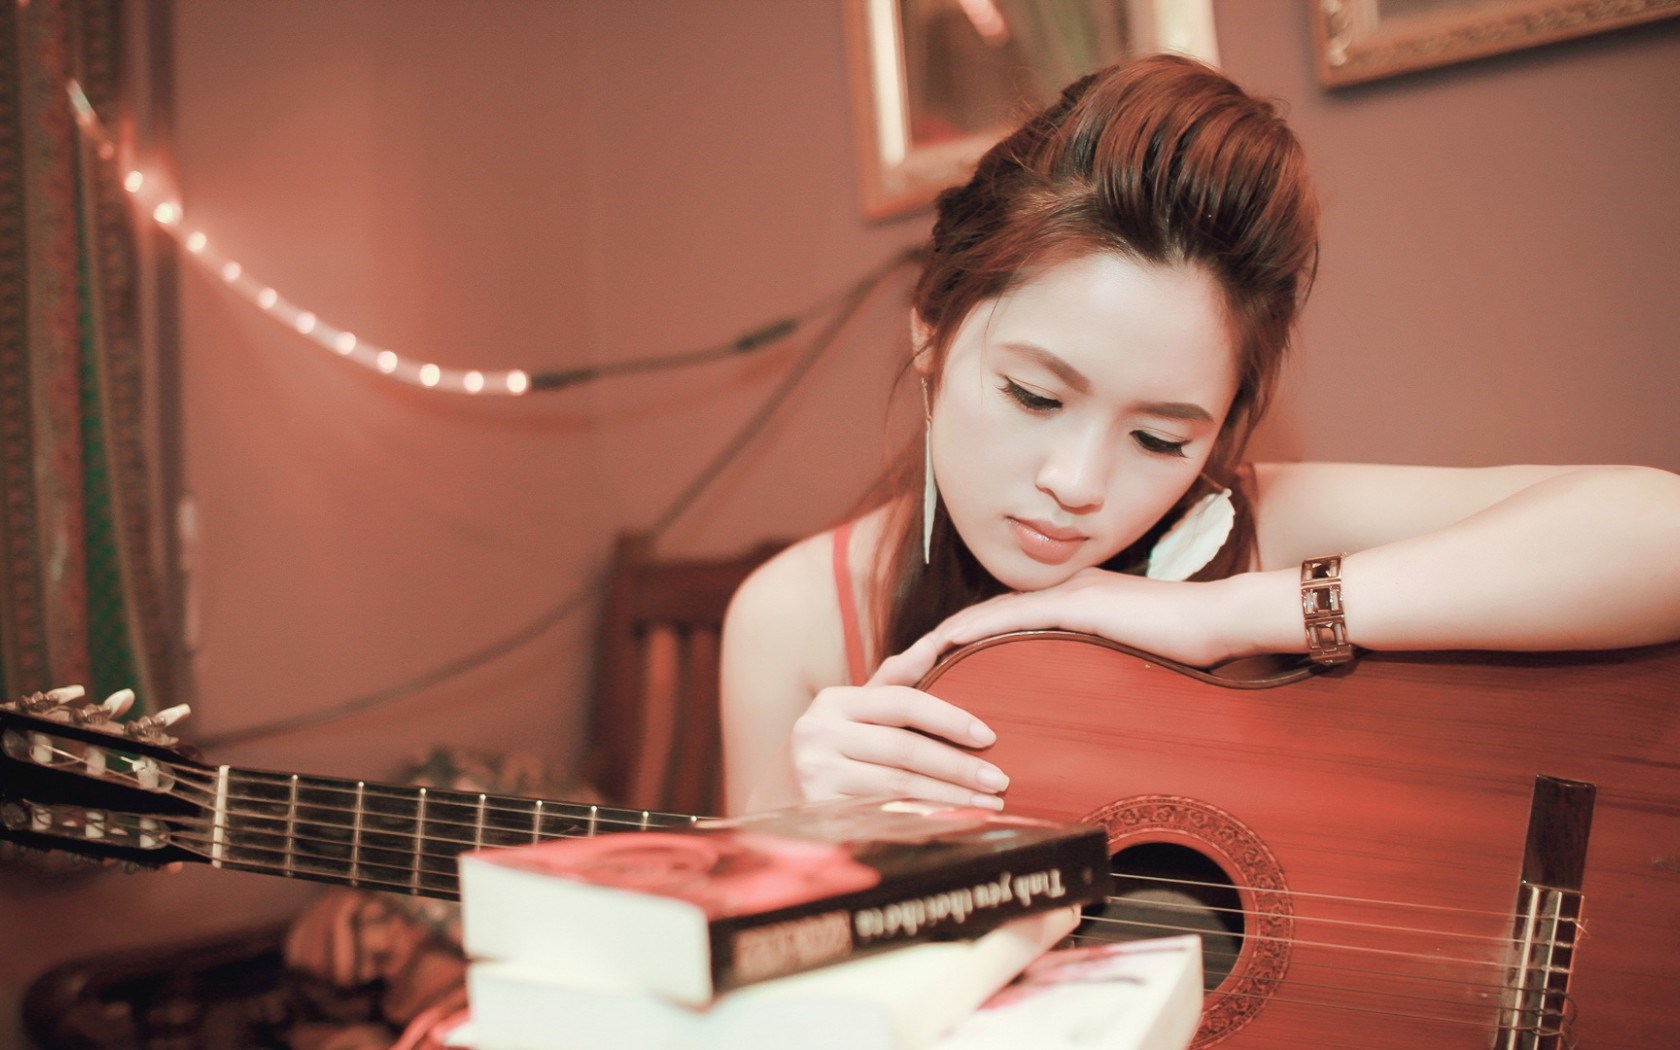 Girl Image With Guitar - HD Wallpaper 